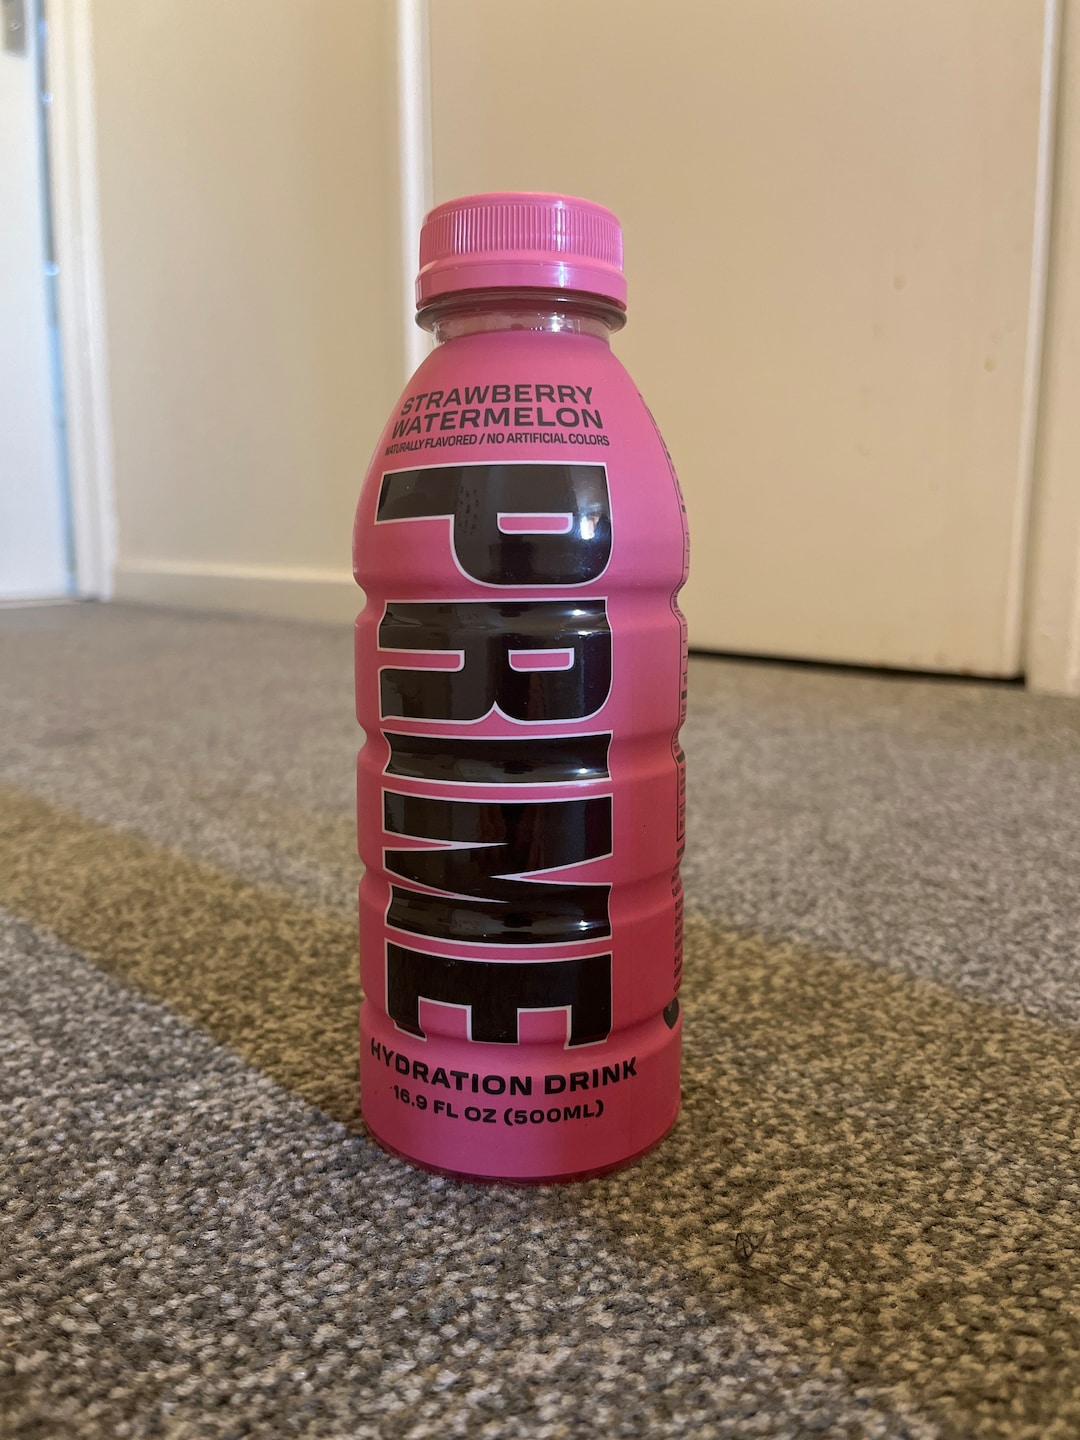 Prime Hydration Drink Strawberry & Watermelon New Flavour - Etsy UK